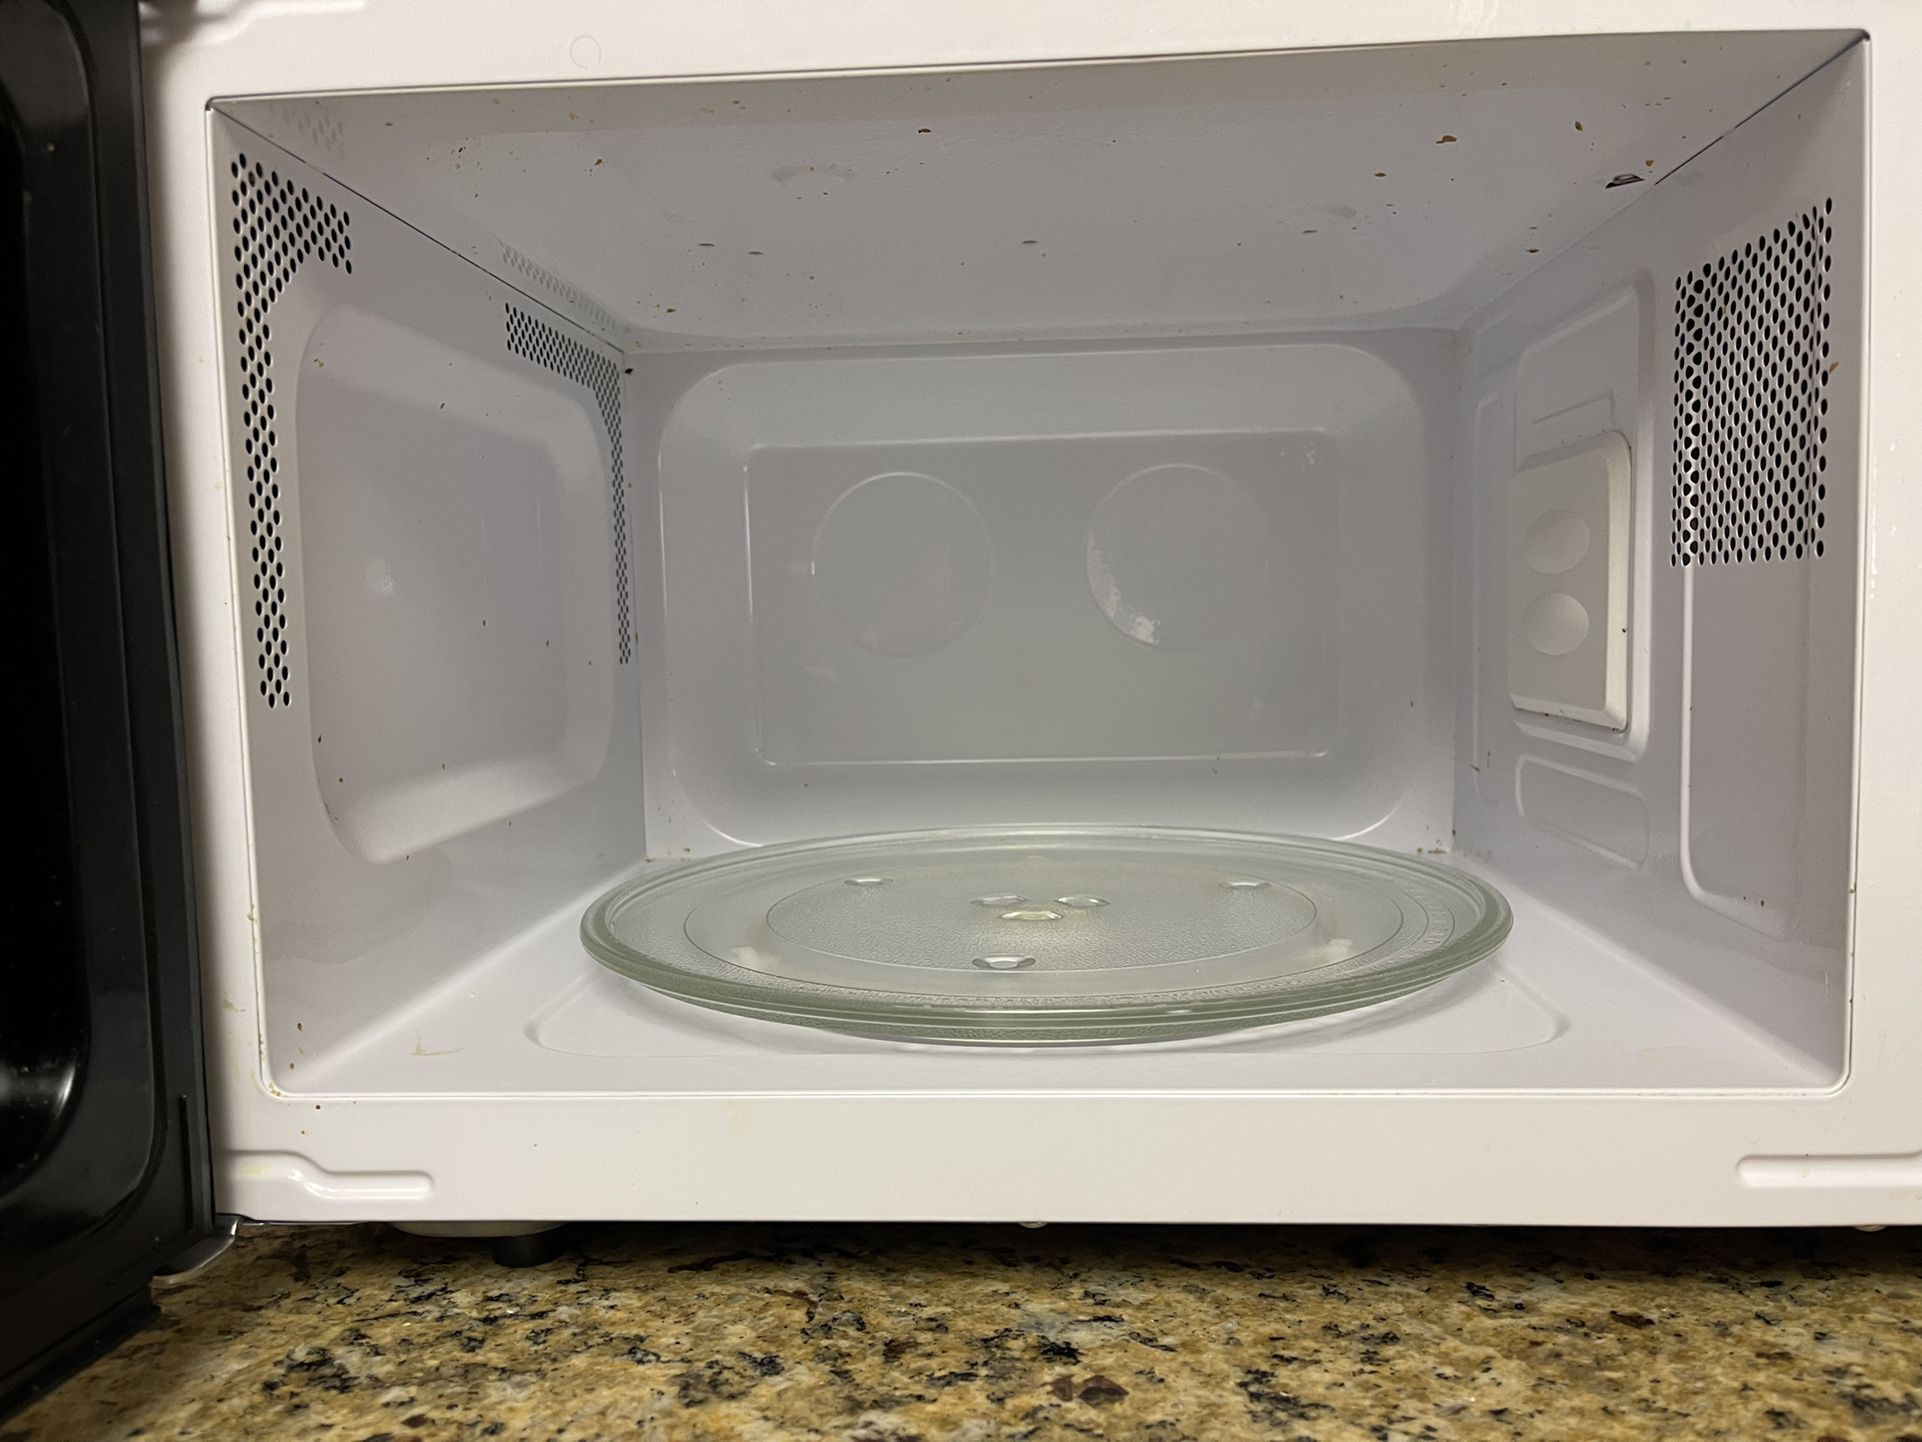 Magic Chef Microwave for Sale in Greenwich, OH - OfferUp